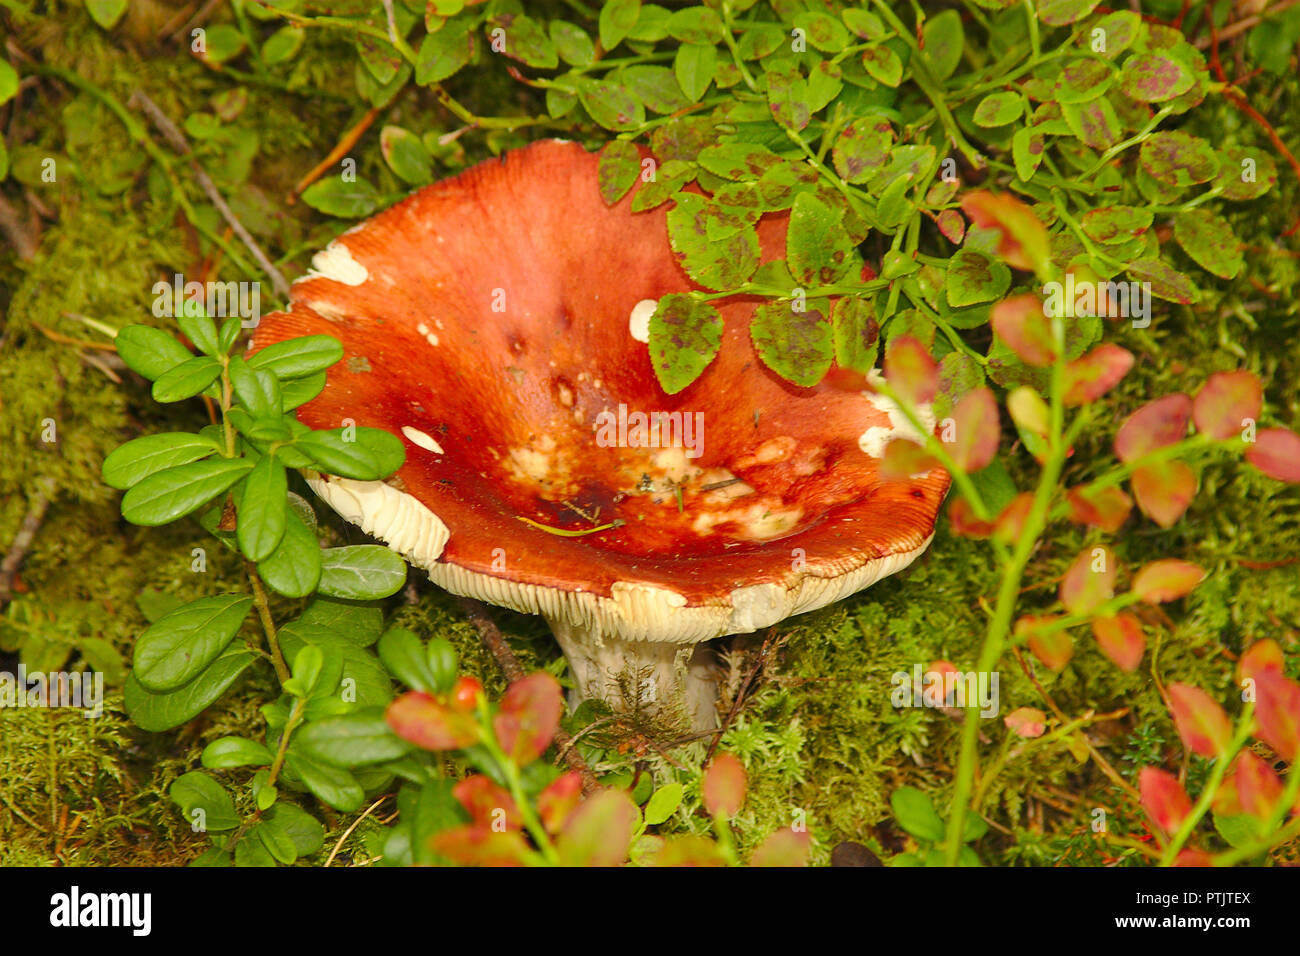 Mushroom season has started. Red russula growing in the forest hidden in green leaves Stock Photo